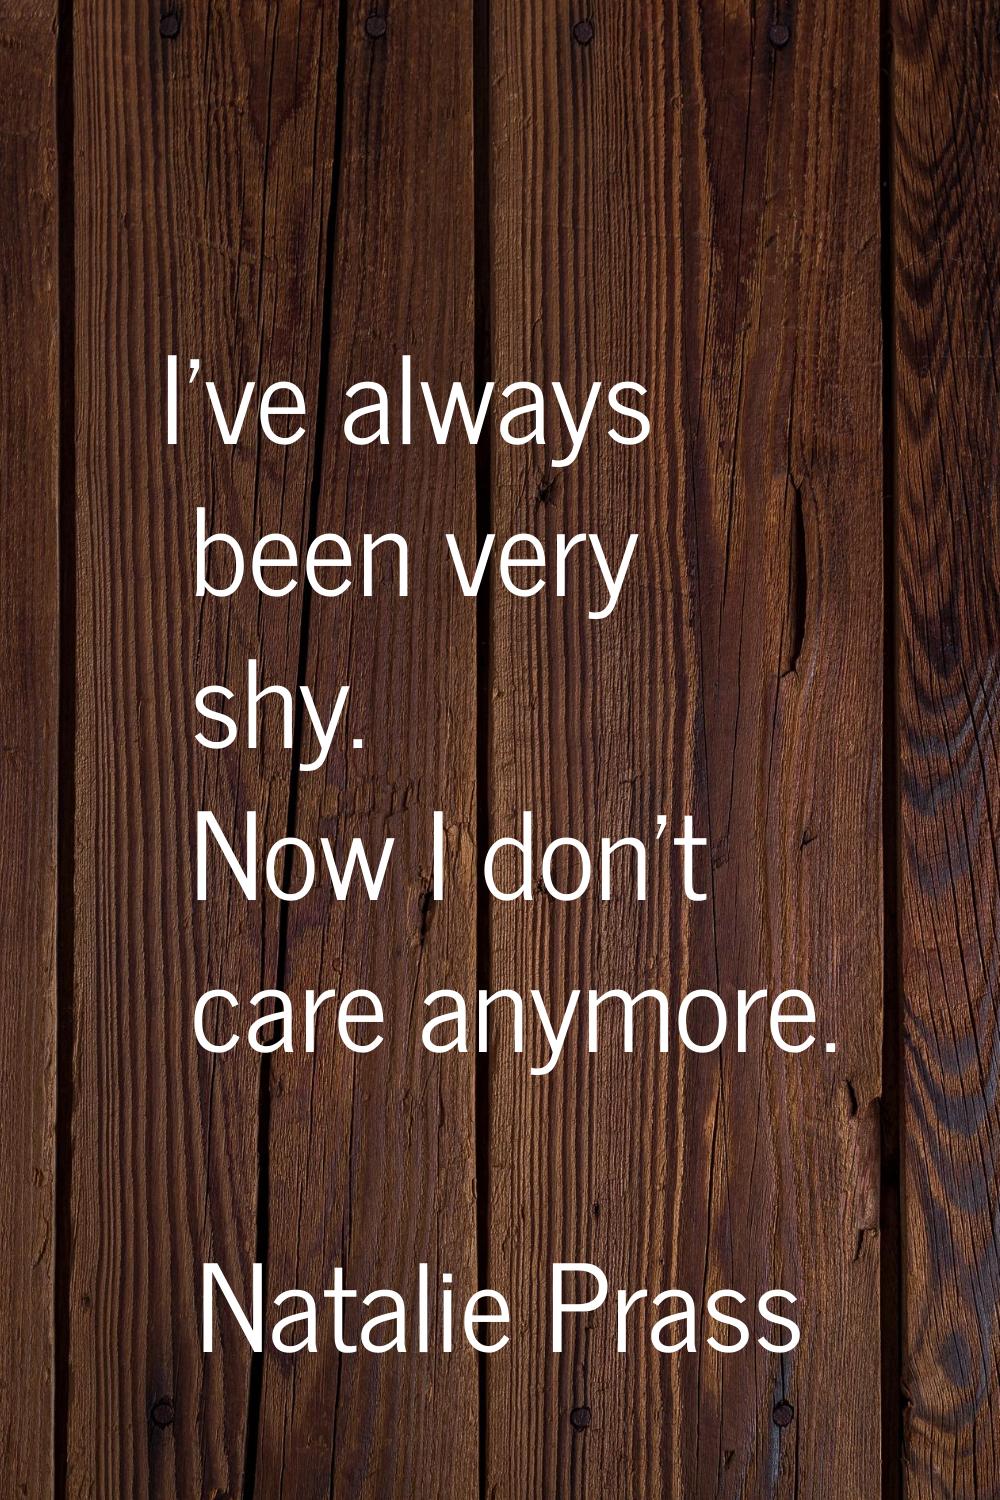 I've always been very shy. Now I don't care anymore.